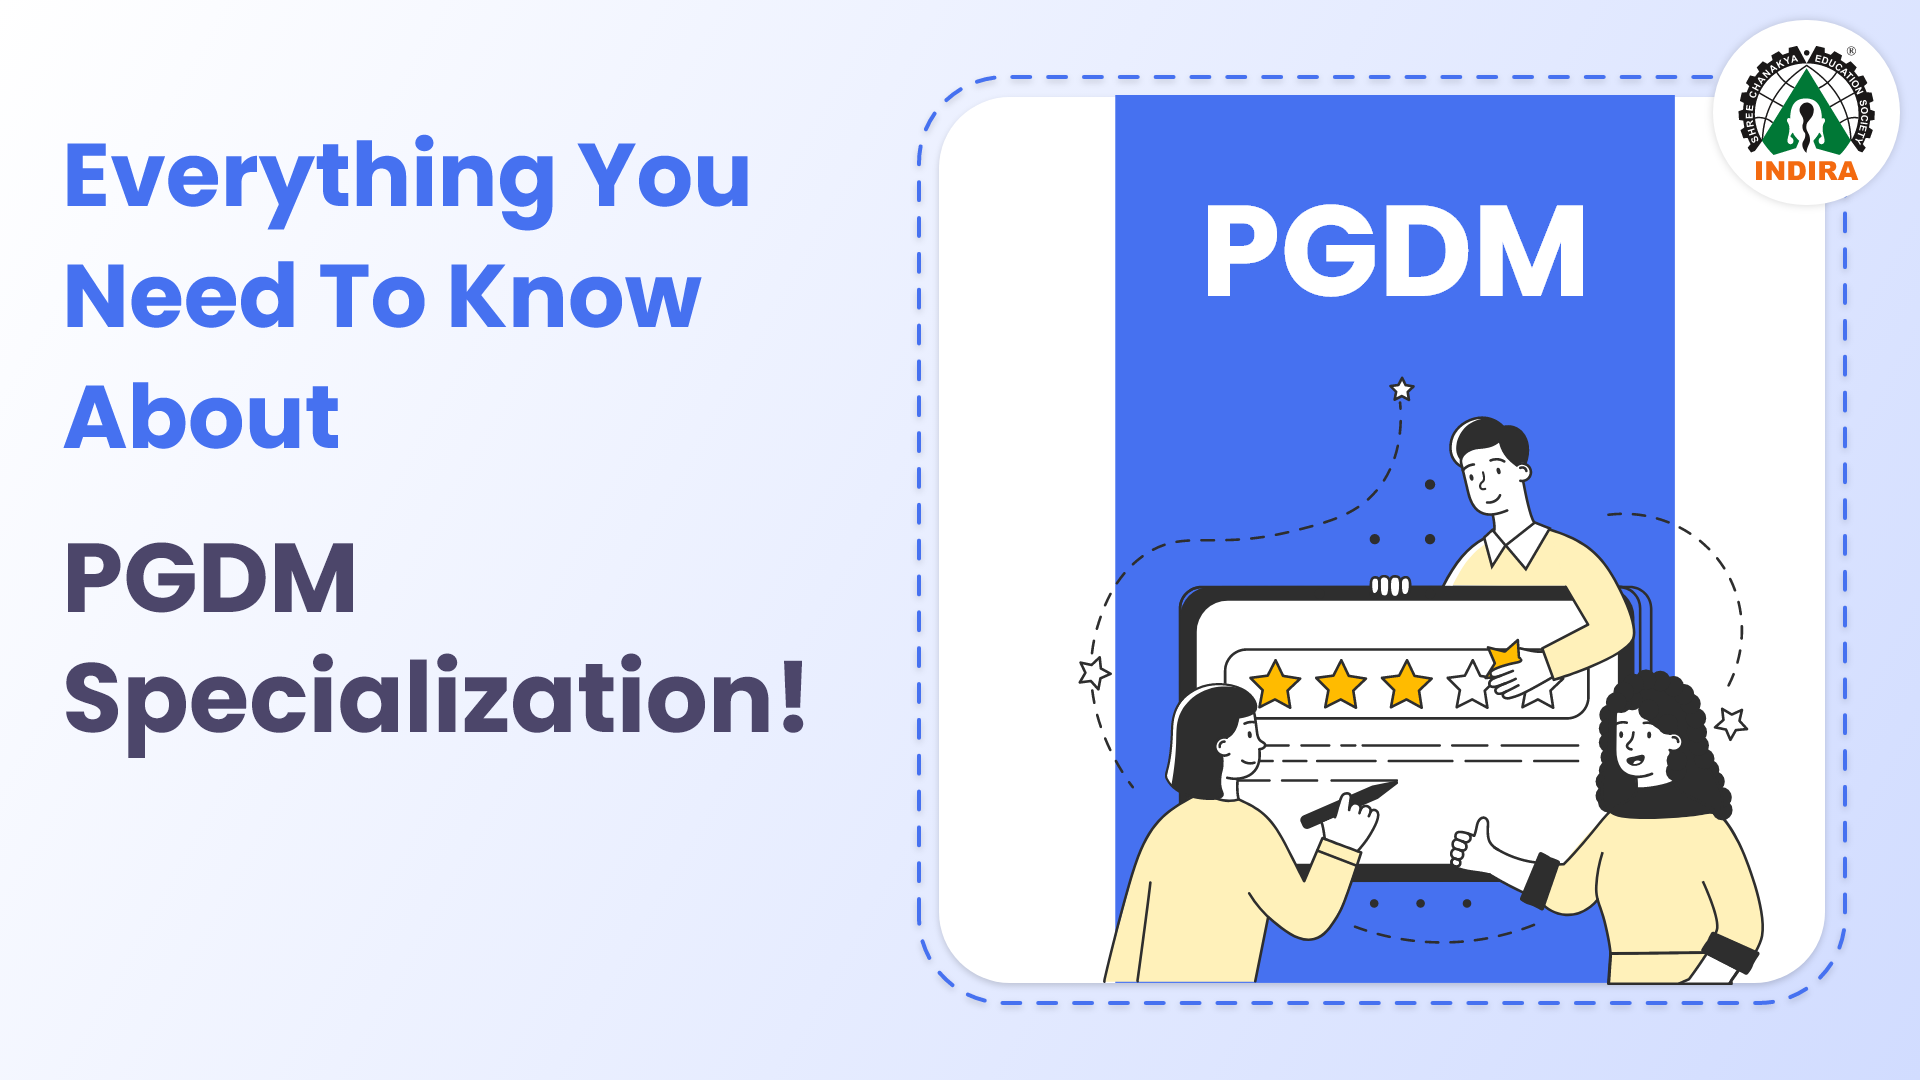 Everything you need to know about PGDM Specialization!